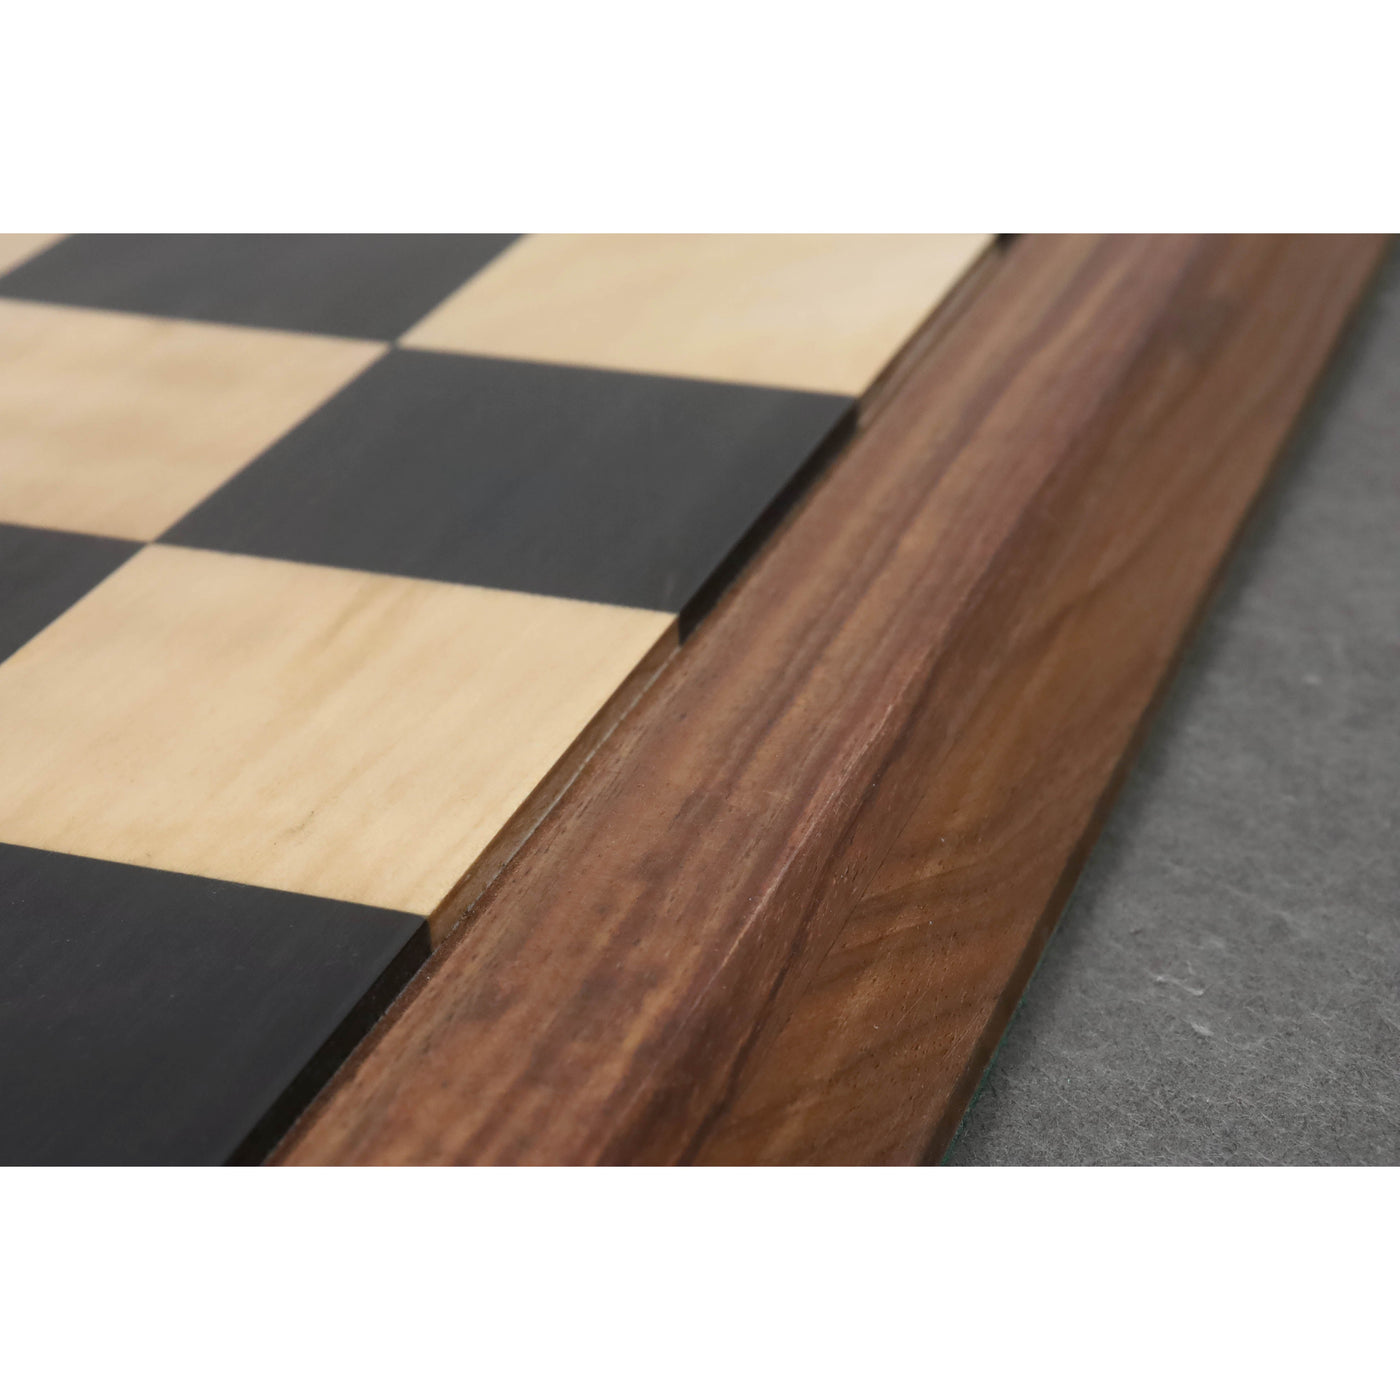 3.7" Emperor Series Staunton Chess Ebony Wood Pieces with 21" Players Choice Solid Ebony & Maple Wood Chess board - Matt Finish and Leatherette Coffer Storage Box